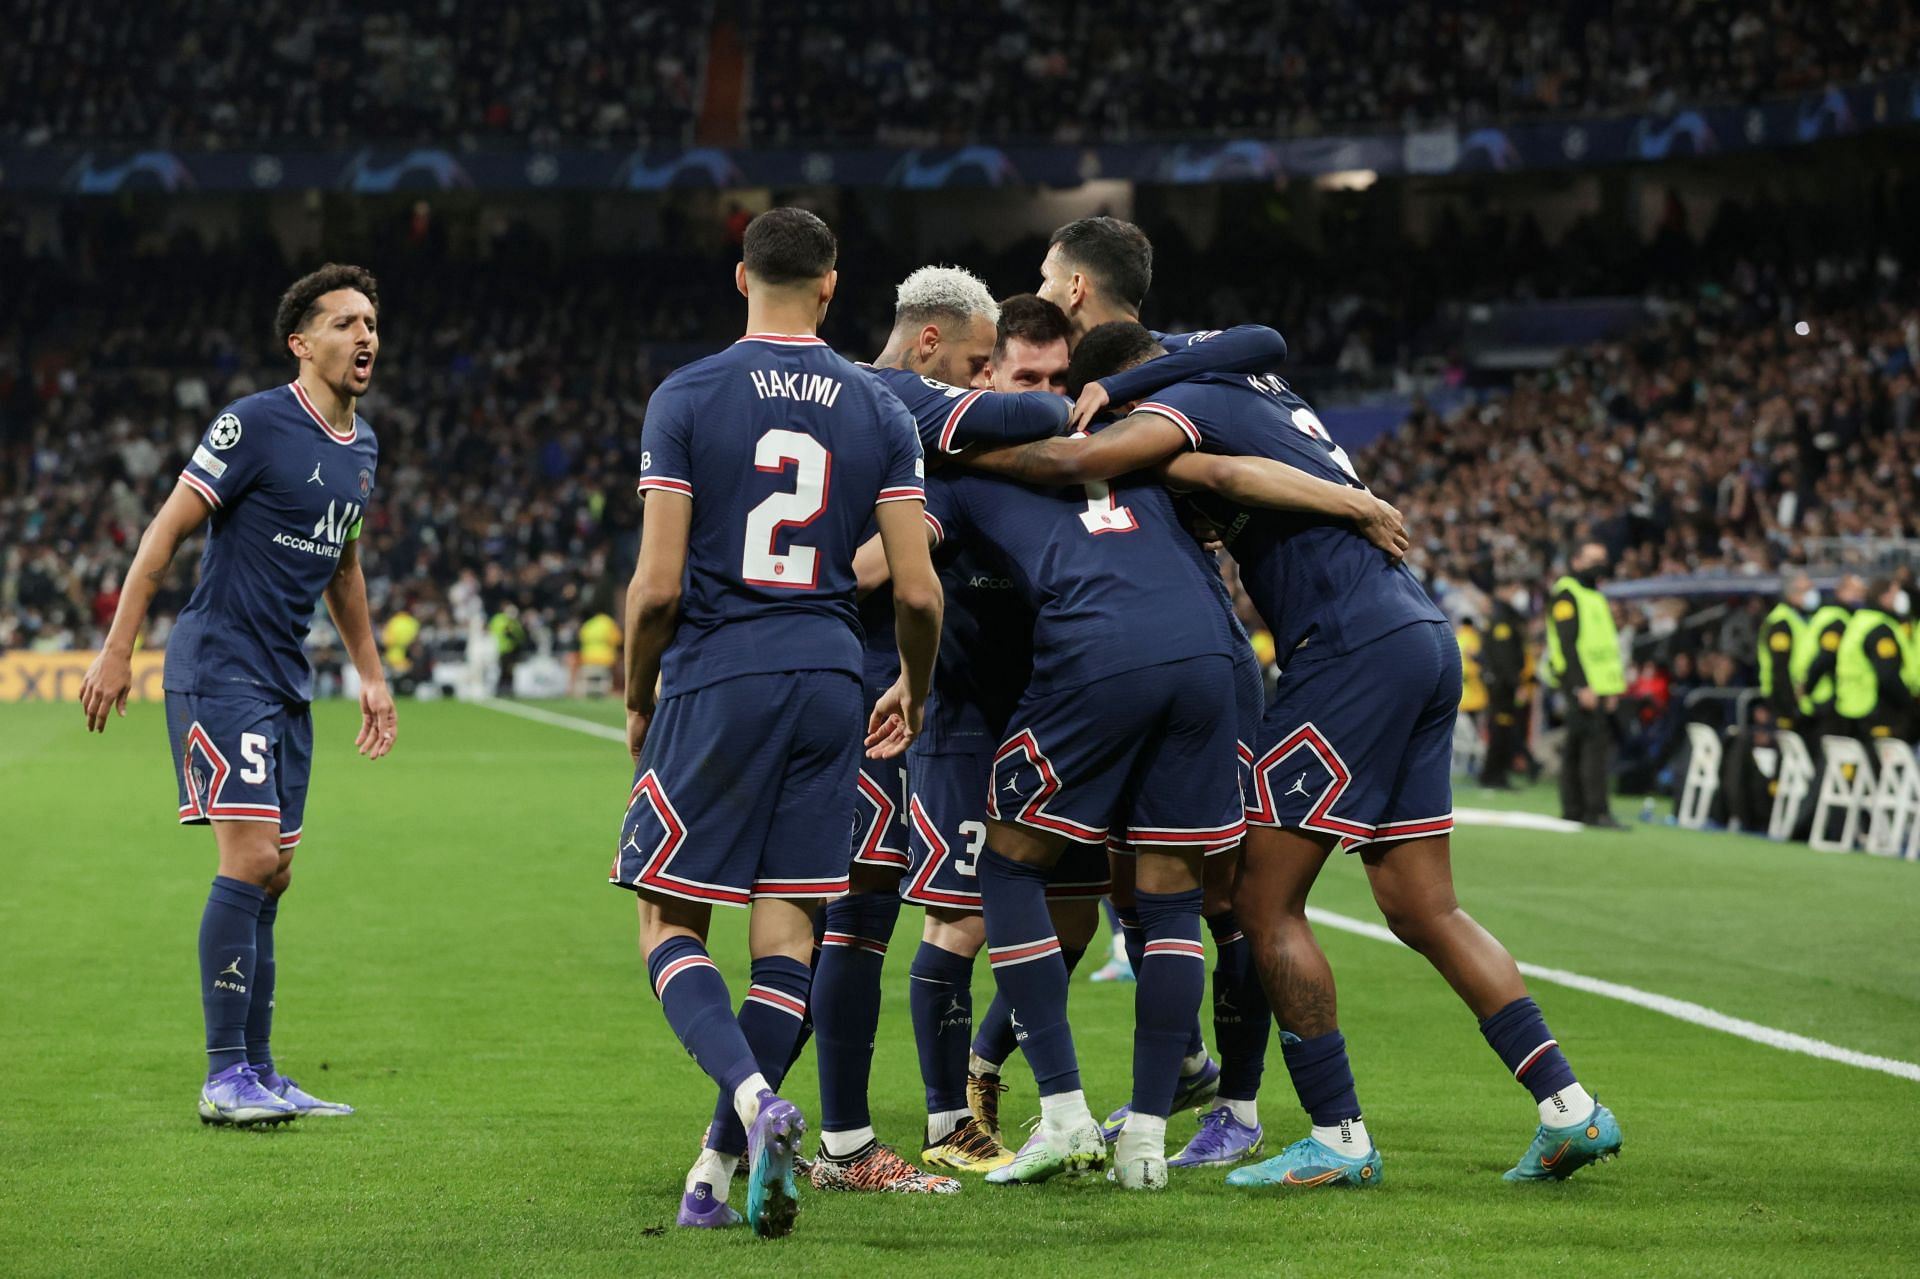 PSG take on Marseille in a Ligue 1 match this weekend